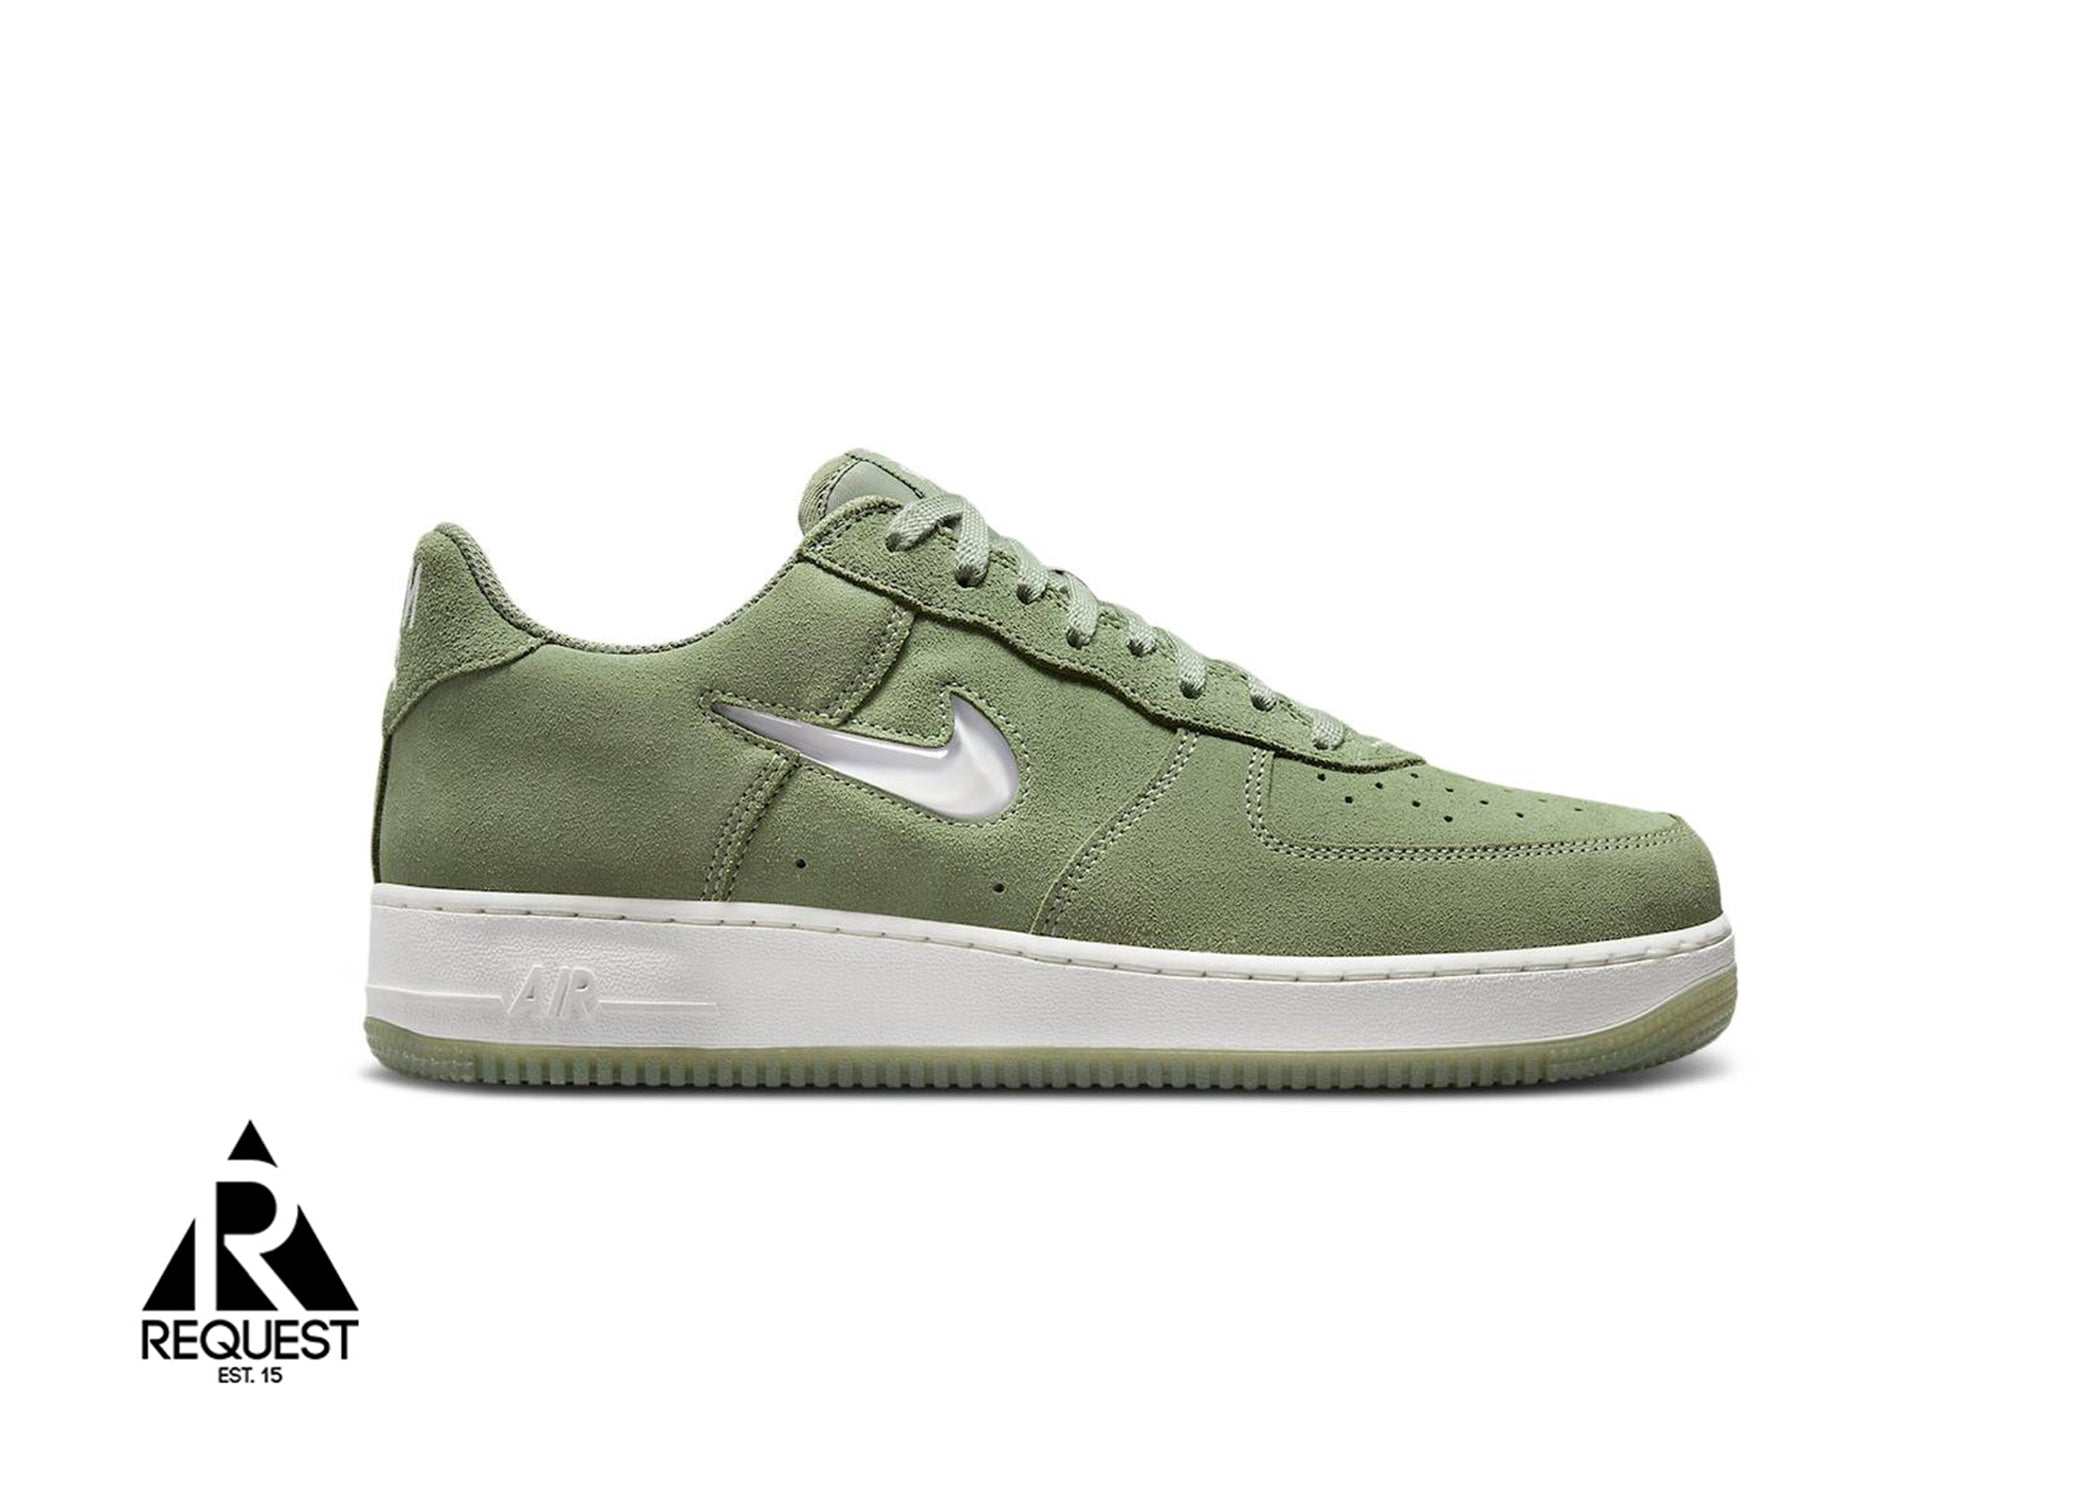 Nike Air Force 1 Jewel "Color of the Month Oil Green"